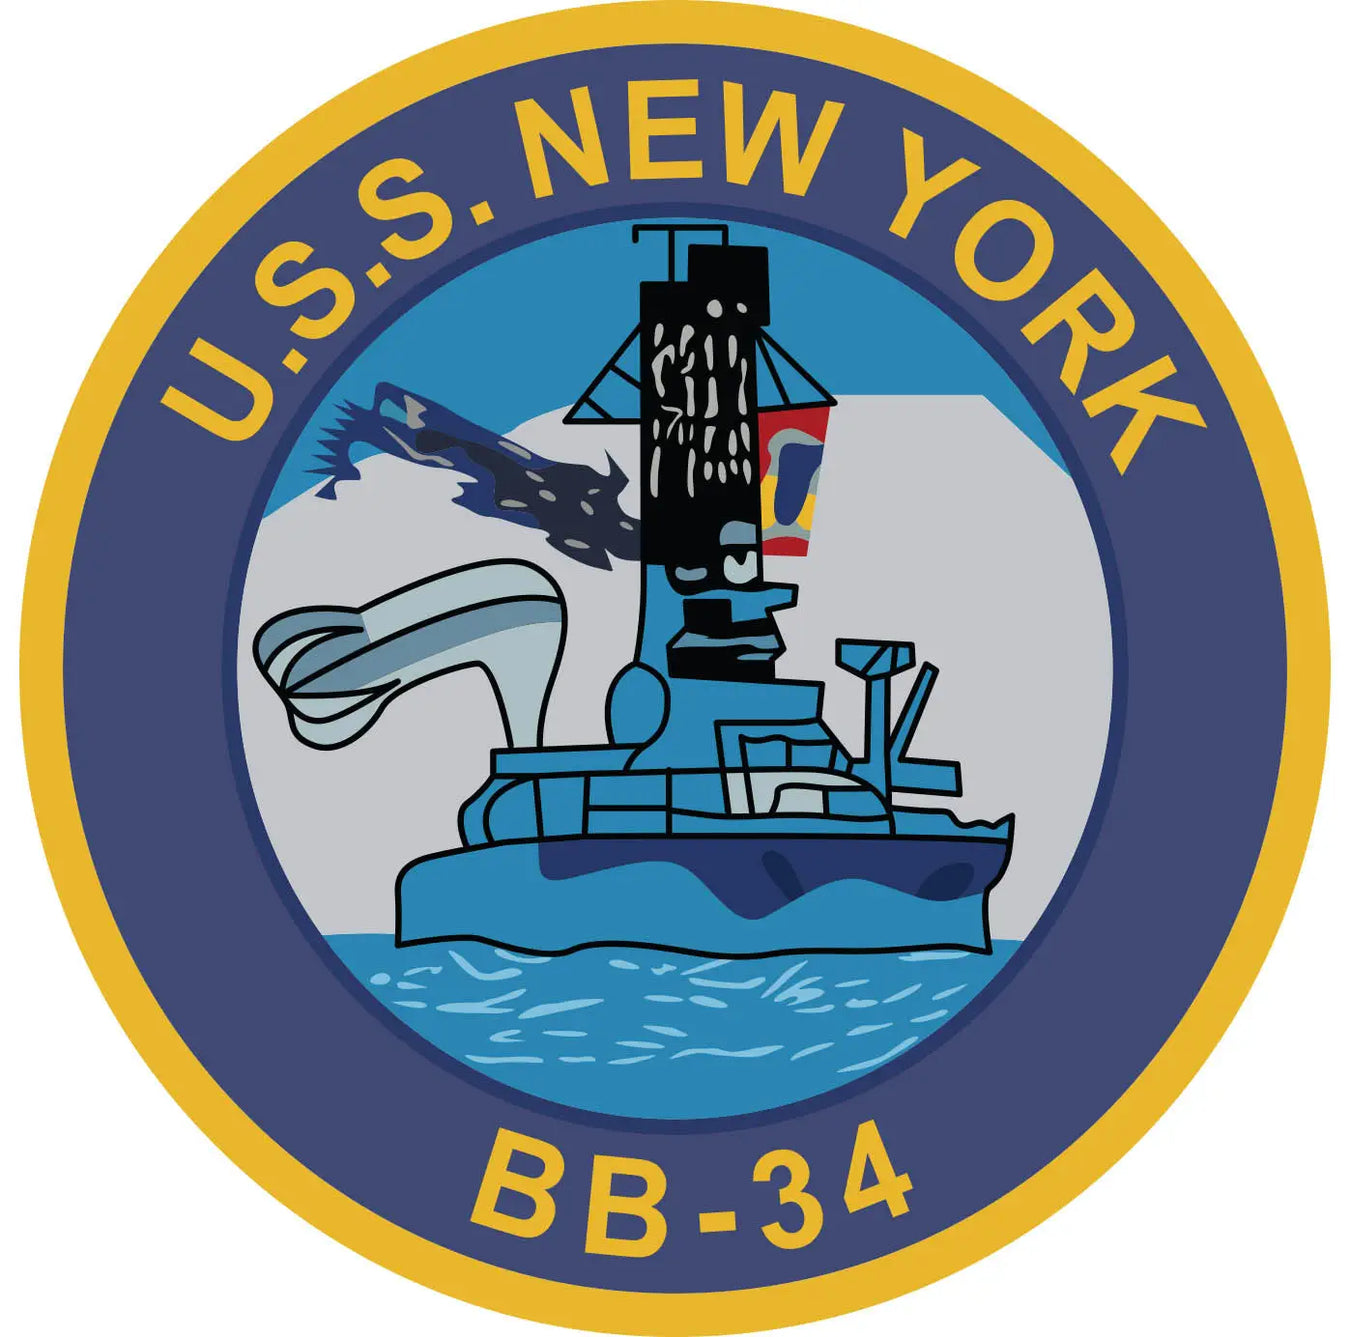 USS New York (BB-34) Merchandise - Shop T-Shirts, hoodies, patches, pins, flags, decals, hats and more.